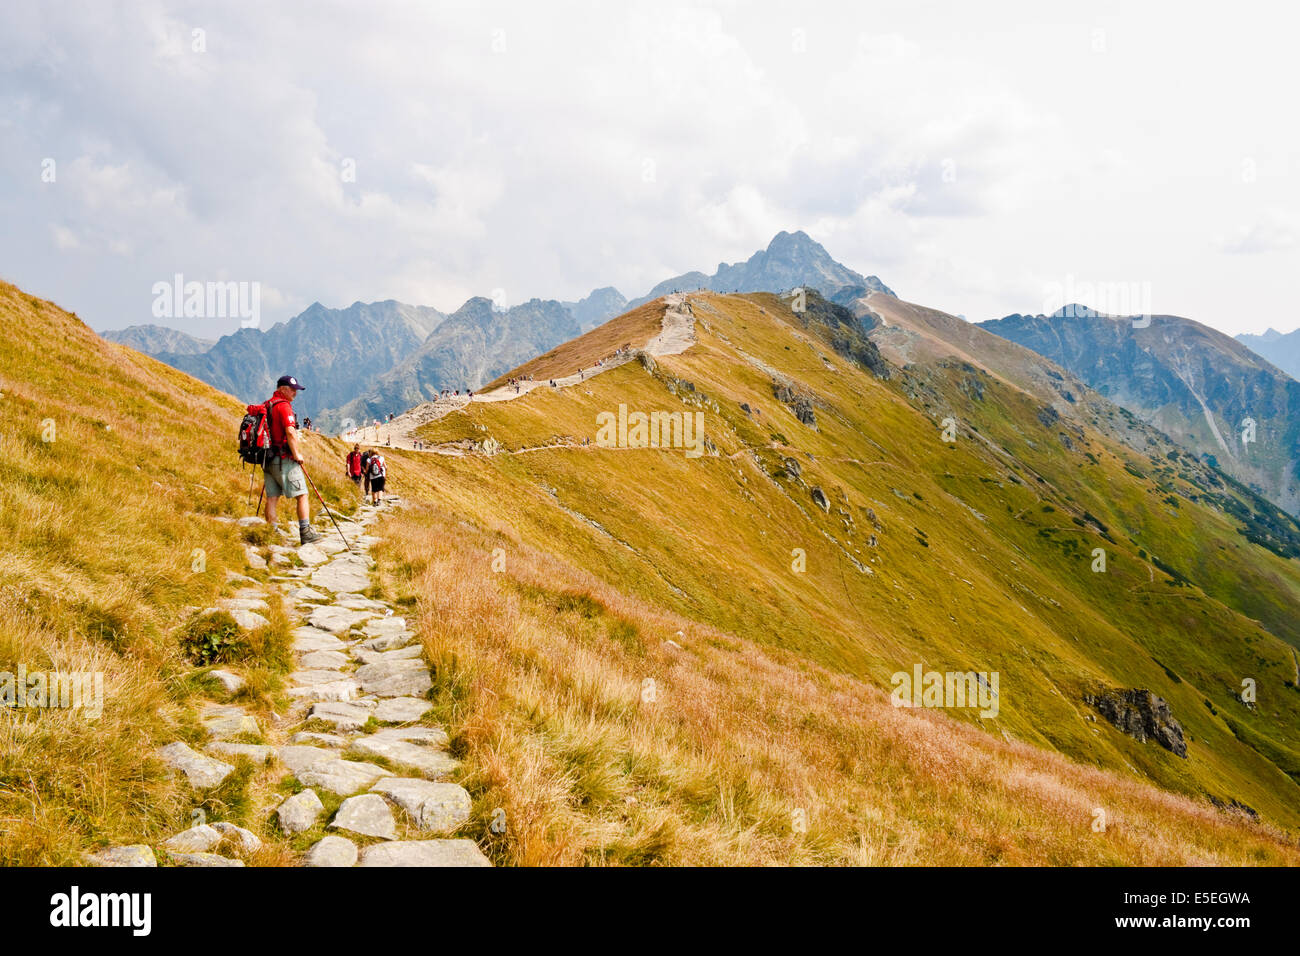 KASPROWY WIERCH, POLAND - SEPTEMBER 3: A man equipped for hiking standing on the walking path in Tatra mountains on September 3, Stock Photo